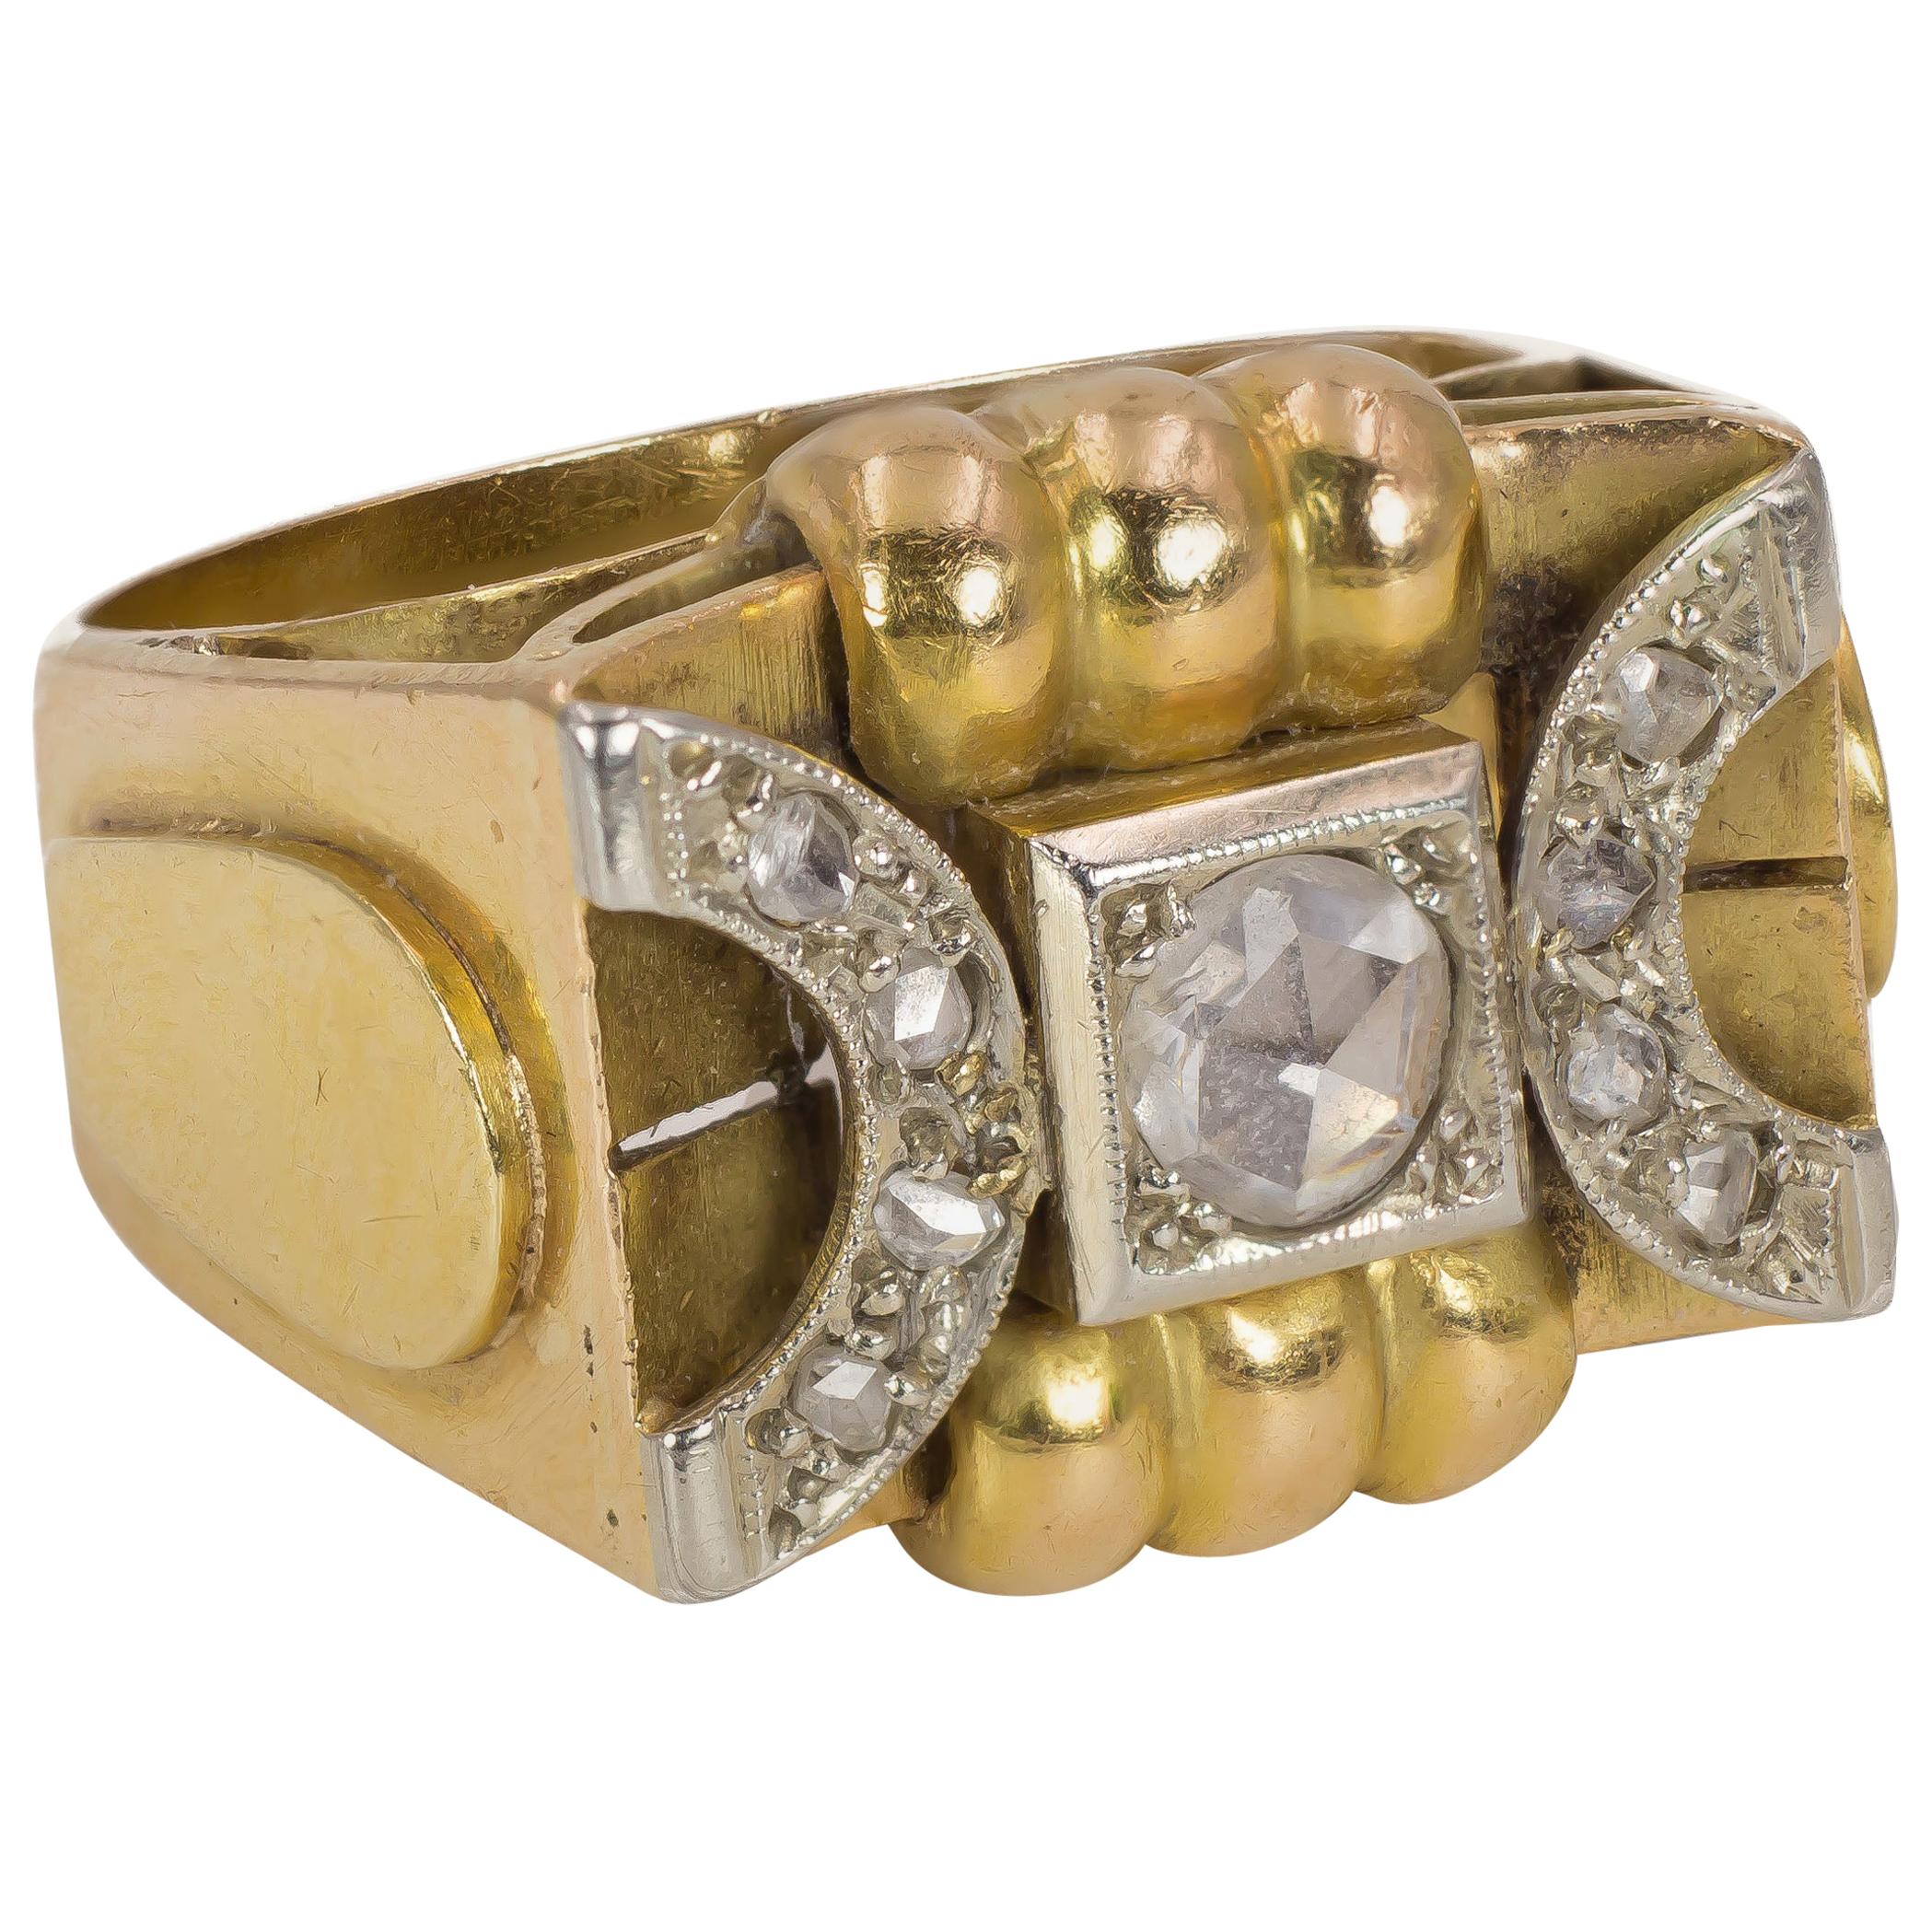 Antique 18 Karat Gold and Diamond Ring, 1930s-1940s For Sale